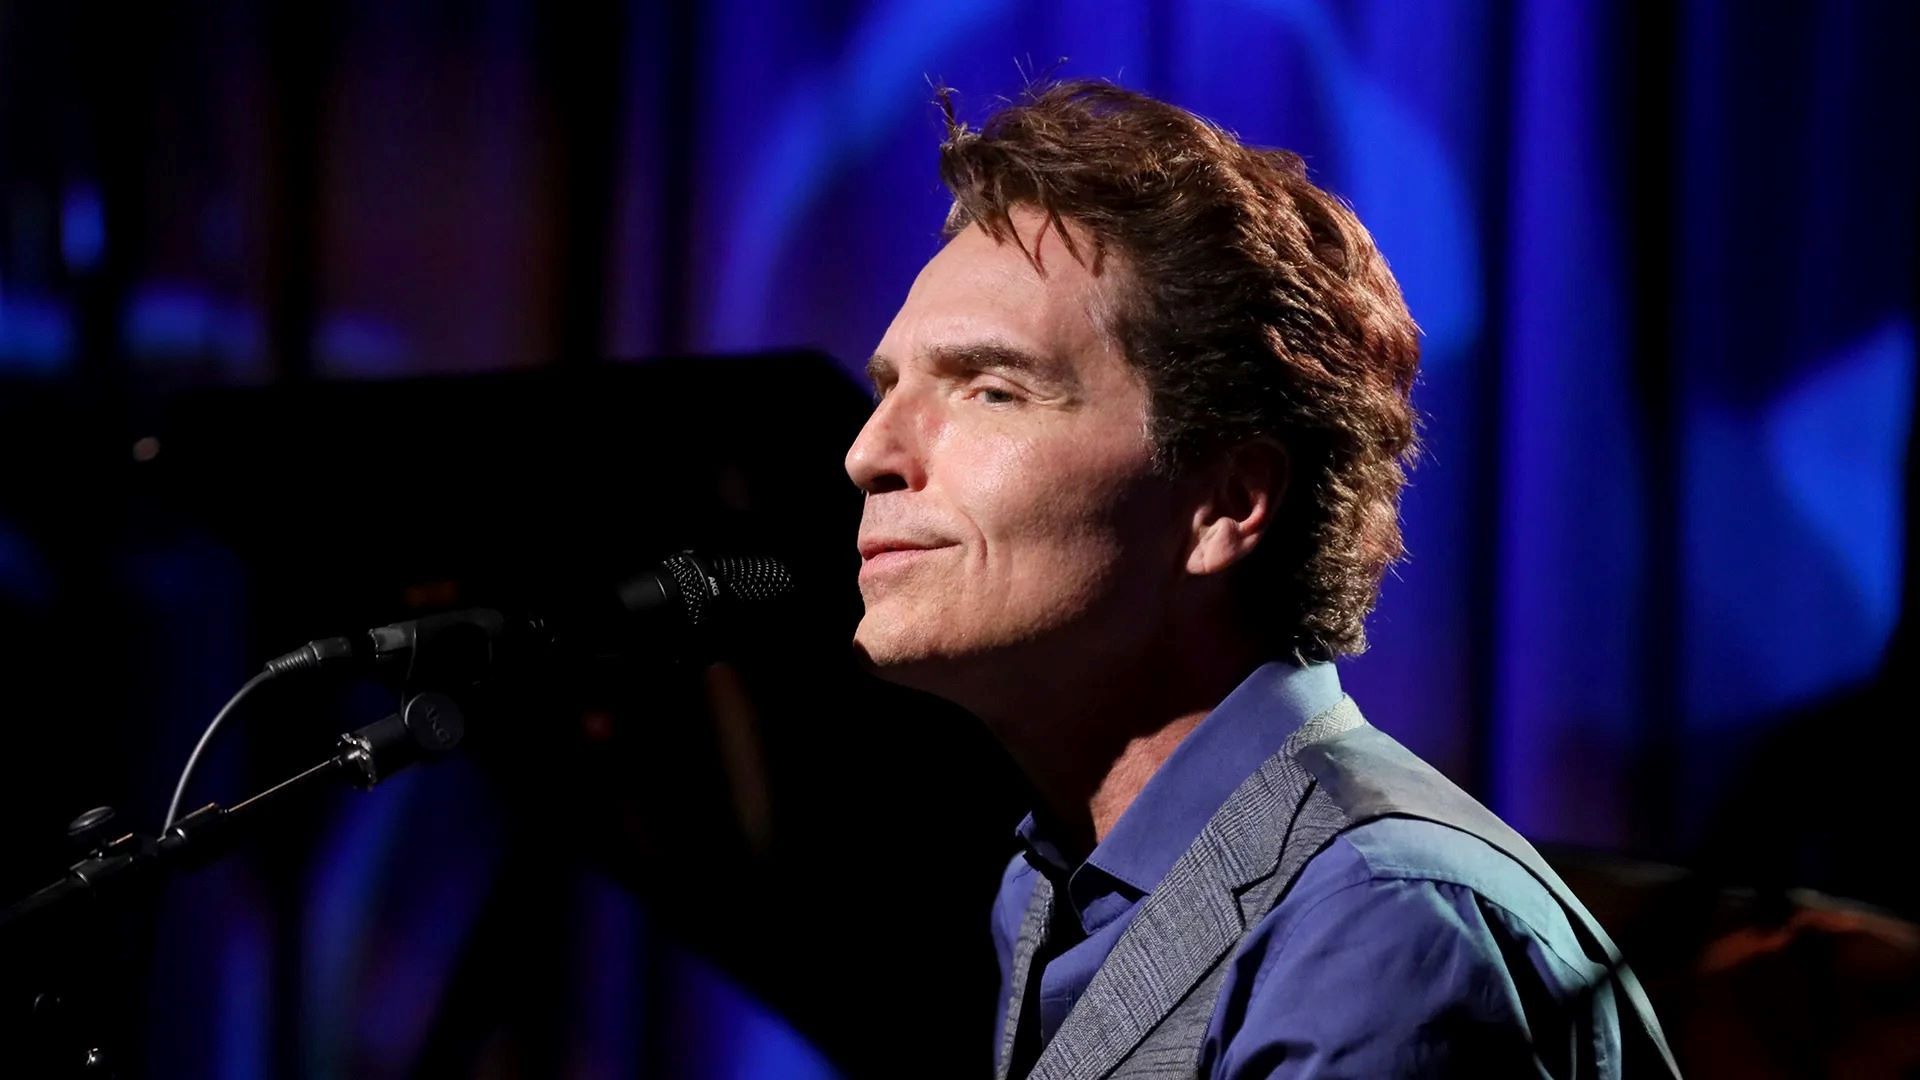 Richard Marx Calls Out Disruptive Fan During Concert